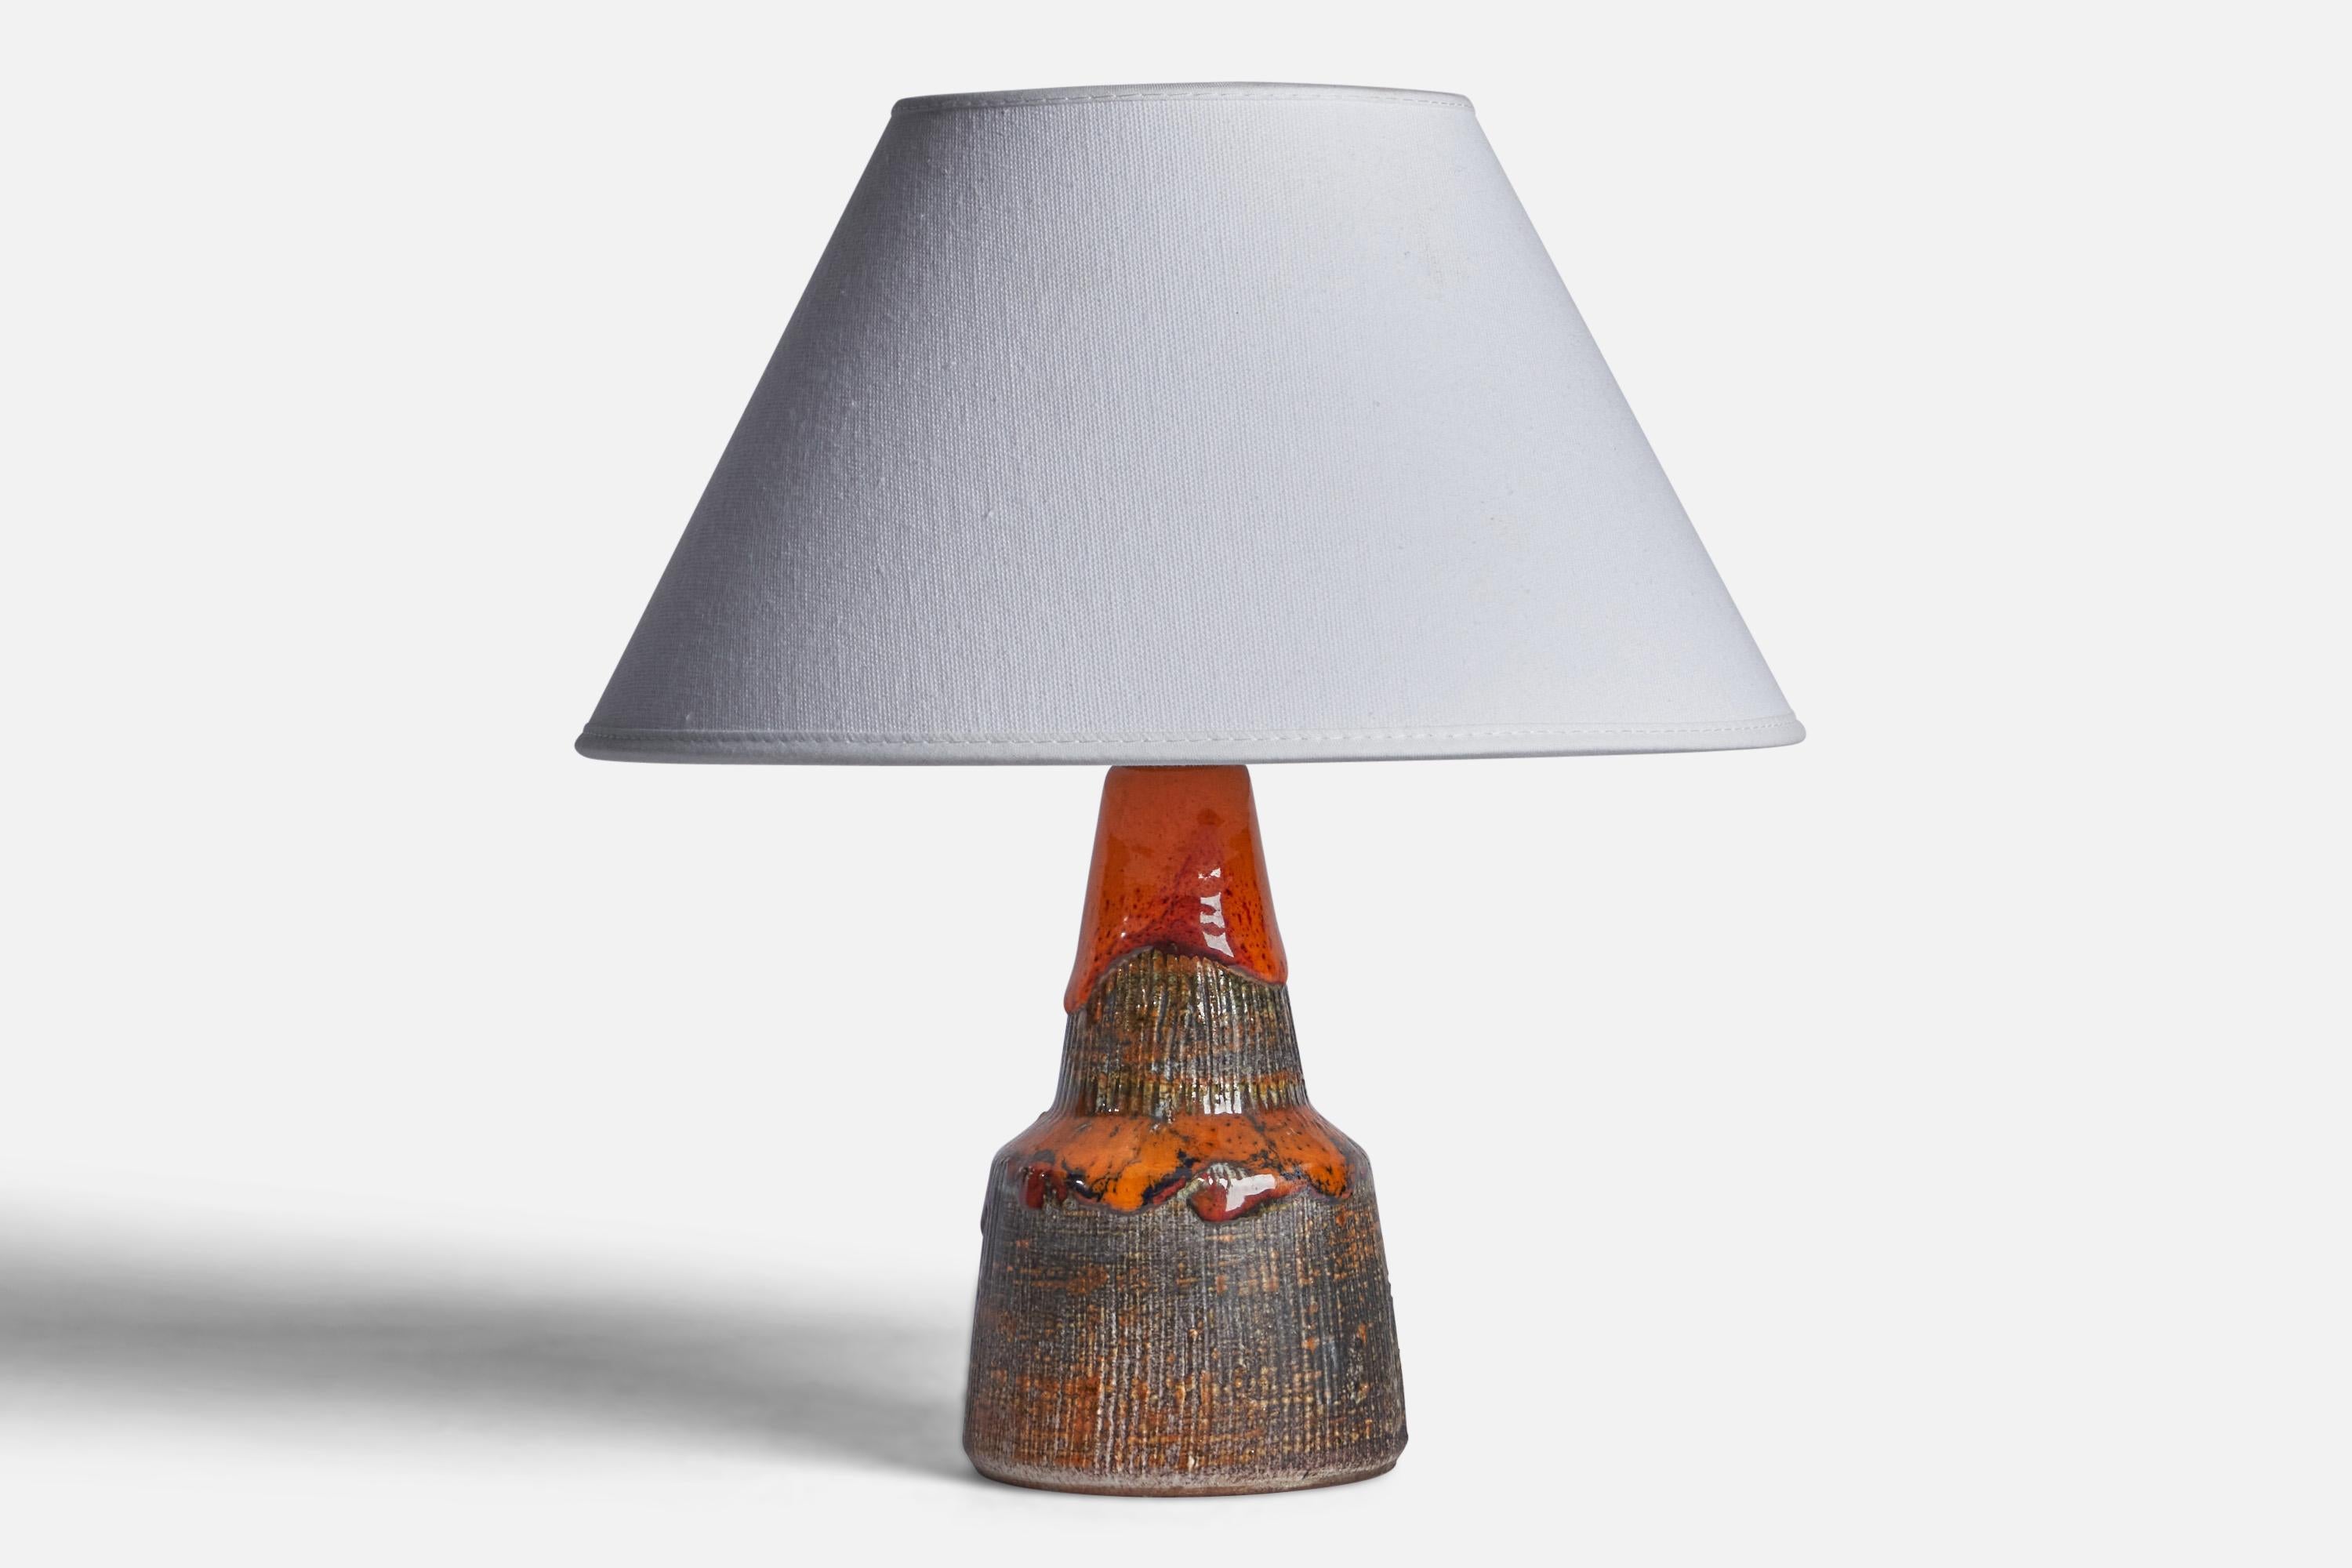 A red, brown and orange-glazed stoneware table lamp designed and produced by Tilgmans Keramik, Sweden, 1960s.

Dimensions of Lamp (inches): 8” H x 3.75” Diameter
Dimensions of Shade (inches): 7” Top Diameter x 10” Bottom Diameter x